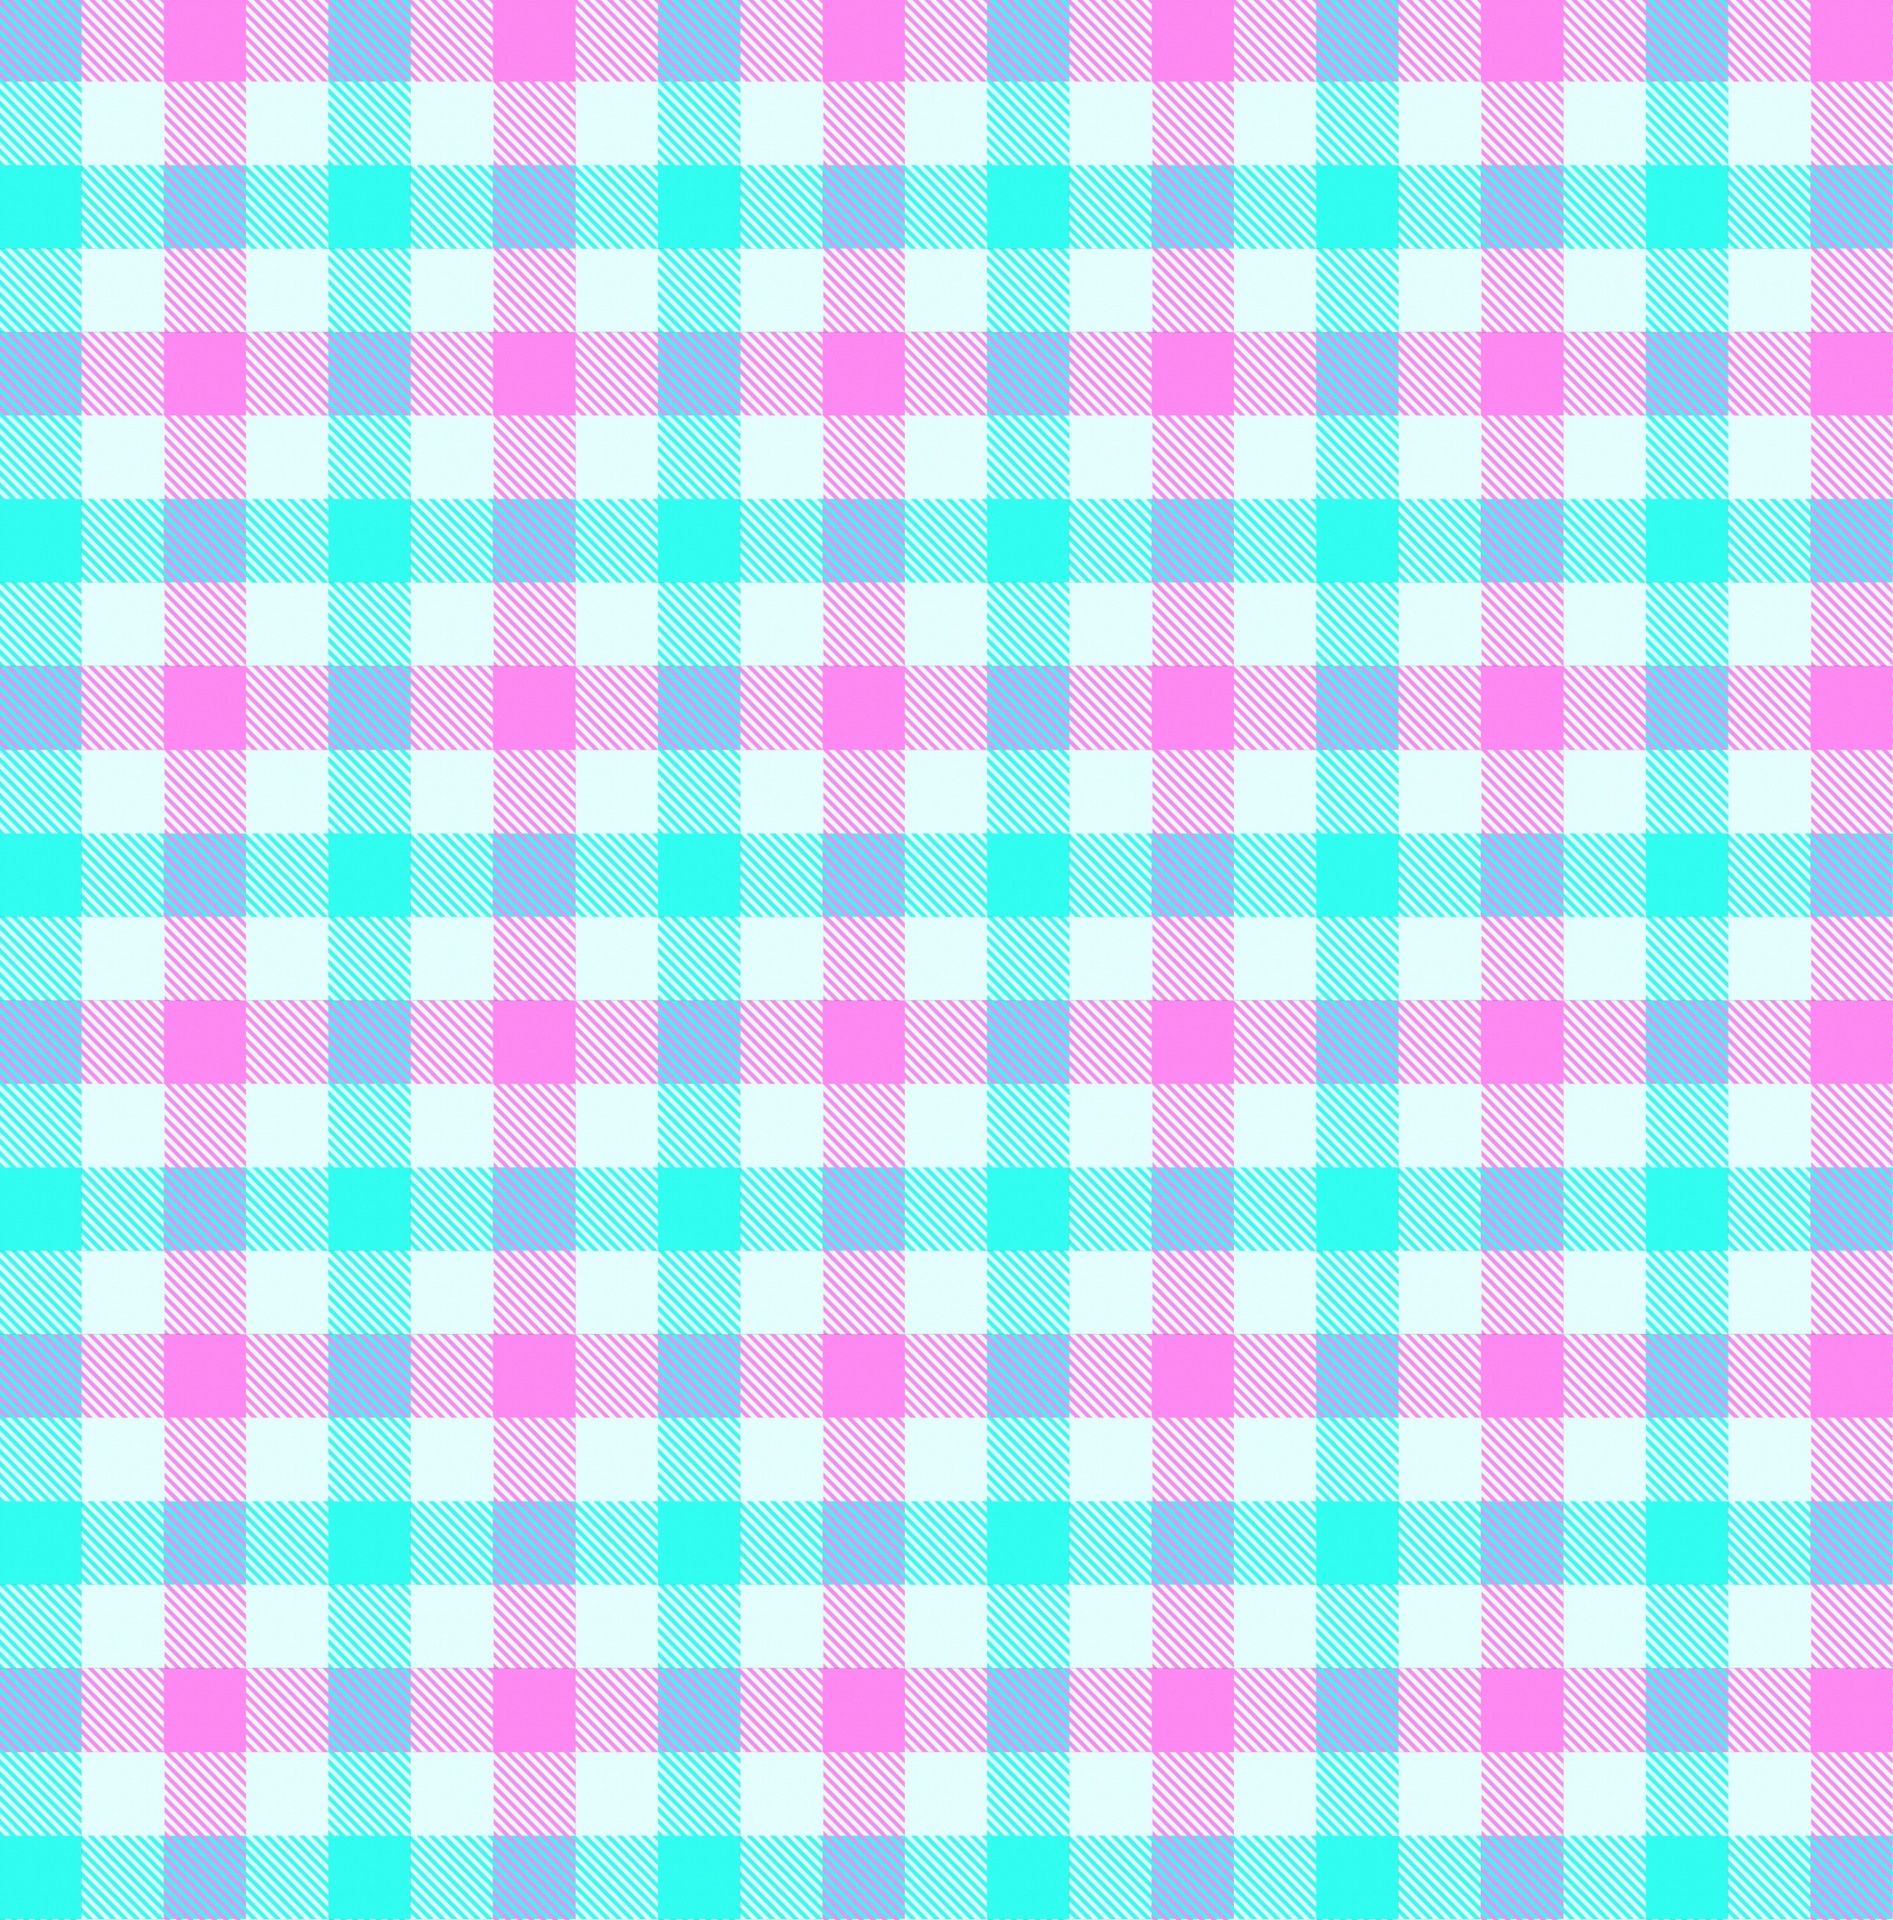 Checkered Pattern Paper Background